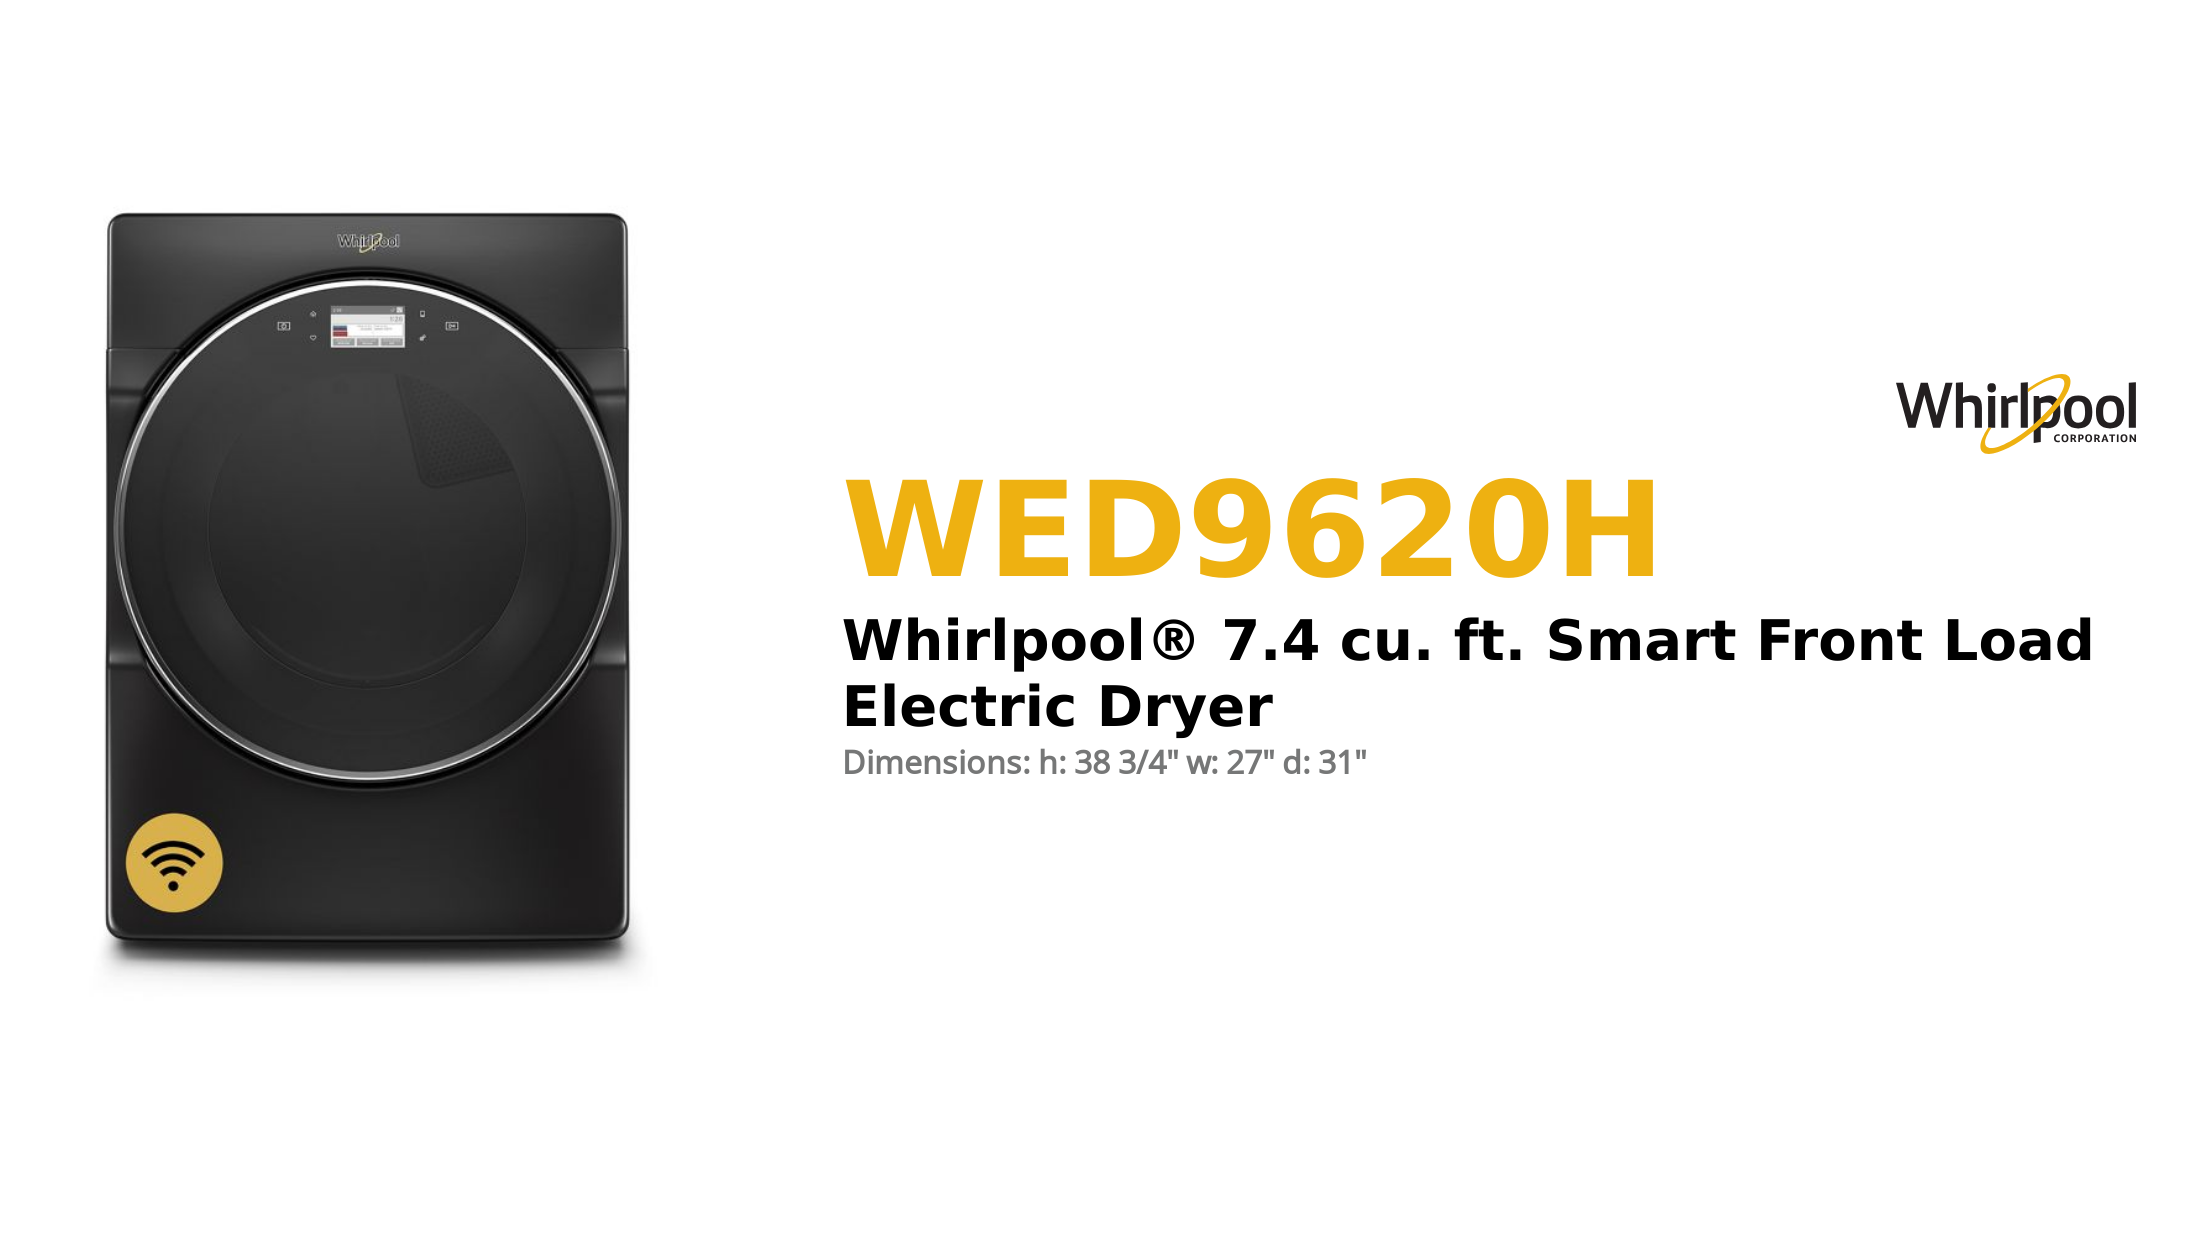 Whirlpool® 7.4 cu. ft. Smart Front Load Electric Dryer